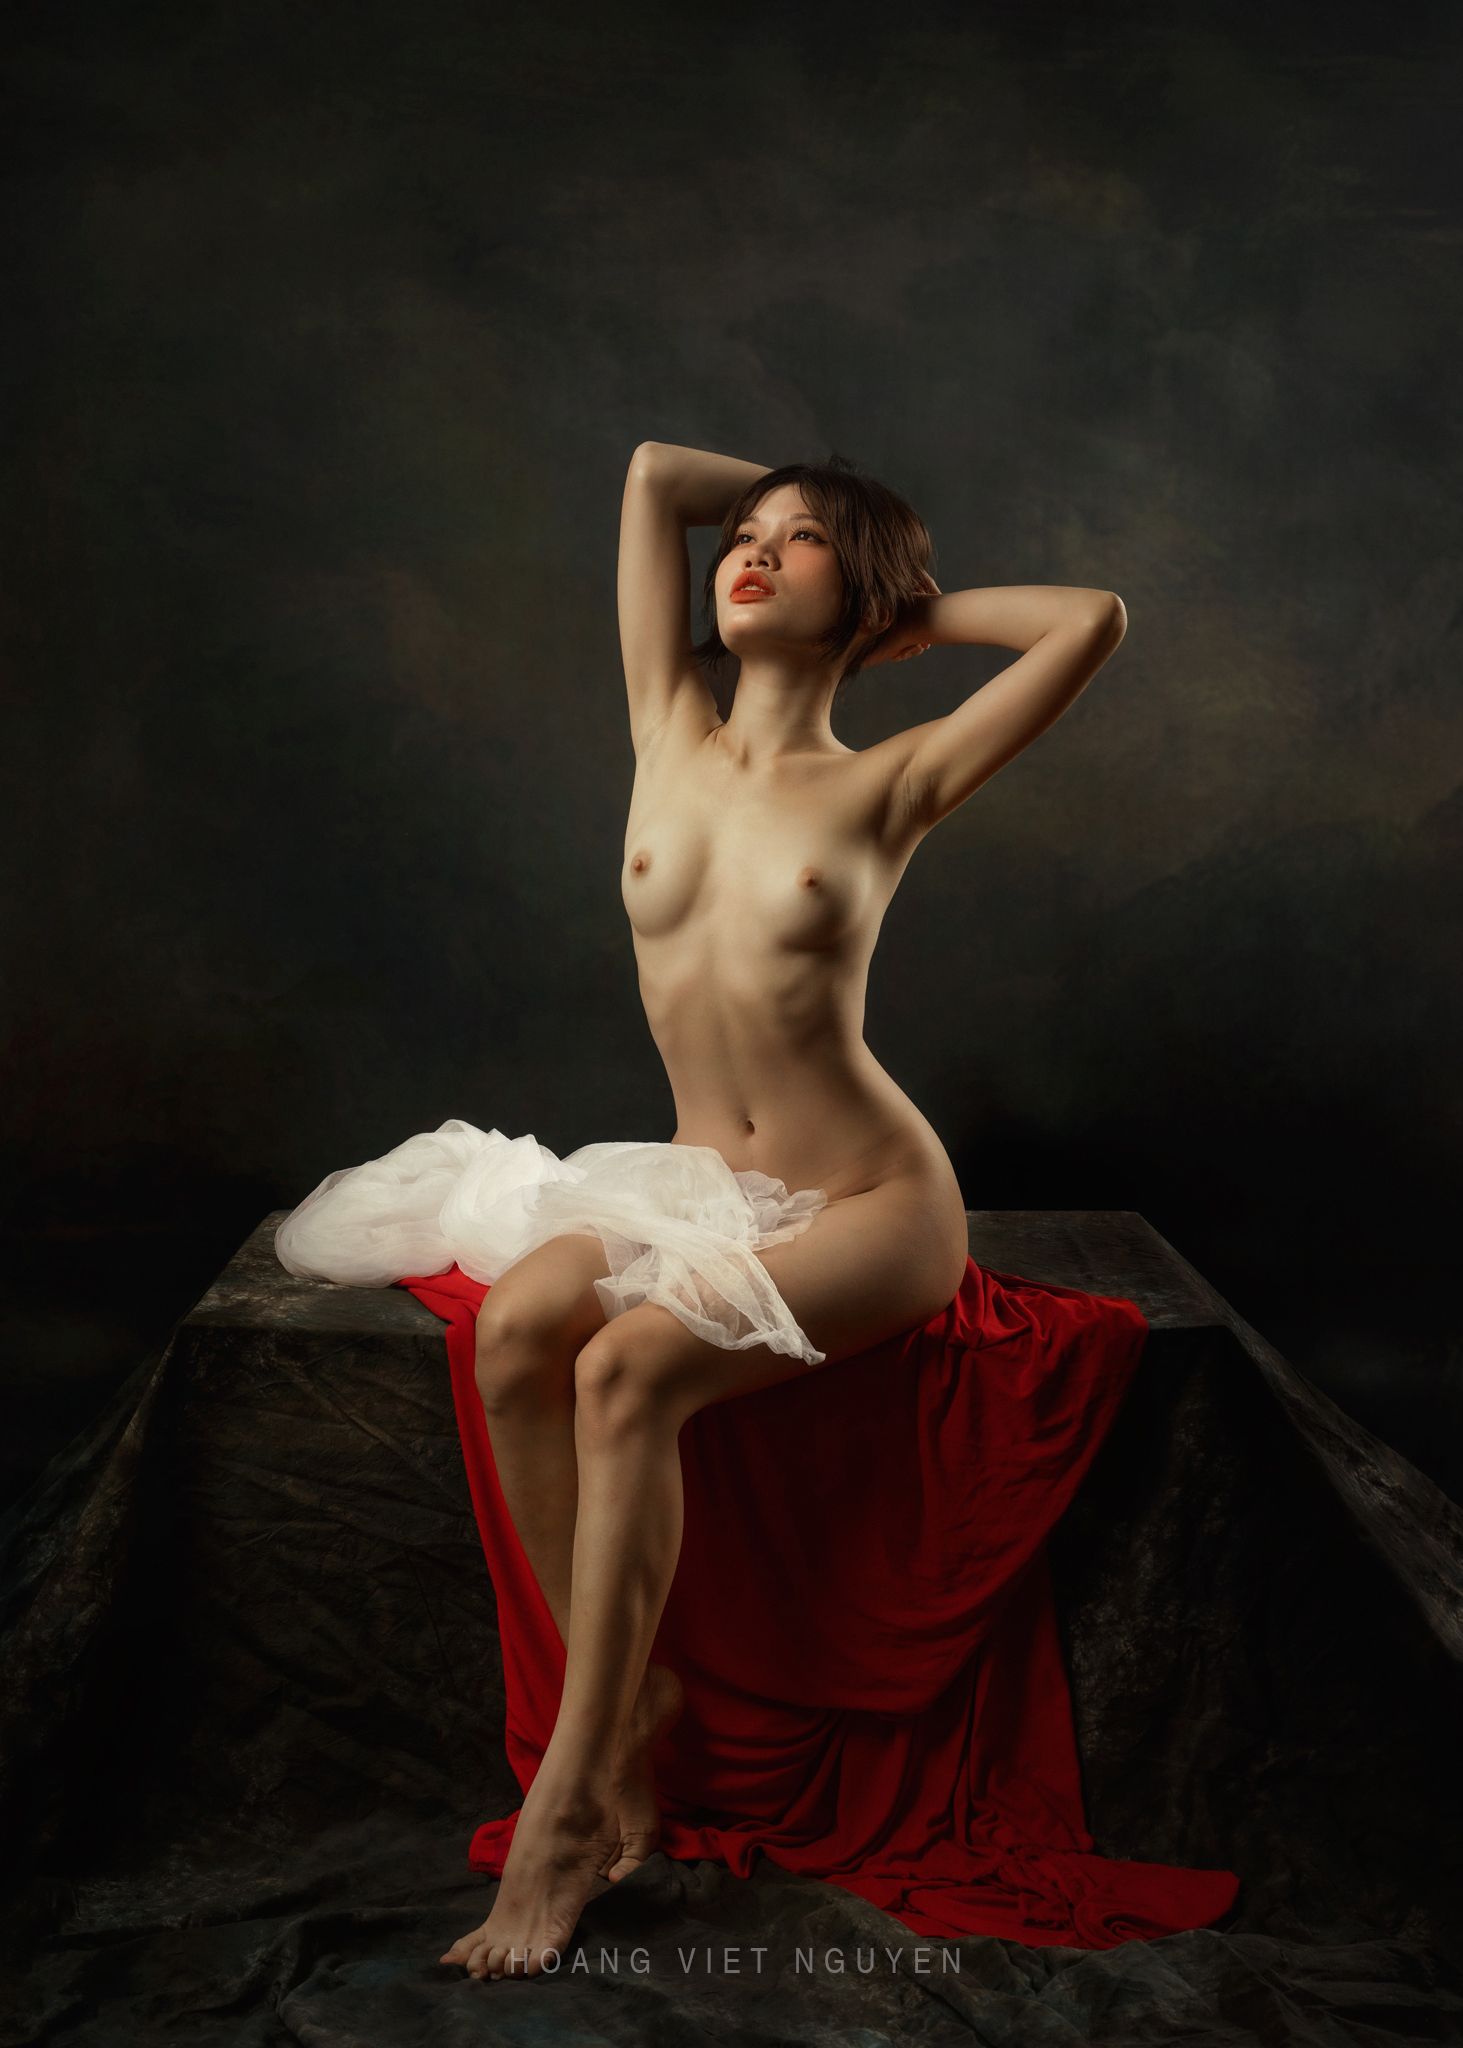 fine nude, nude, glamour, asian, vietnam, vietnamese, body, studio, young, red, painting, Nguyen Hoang Viet